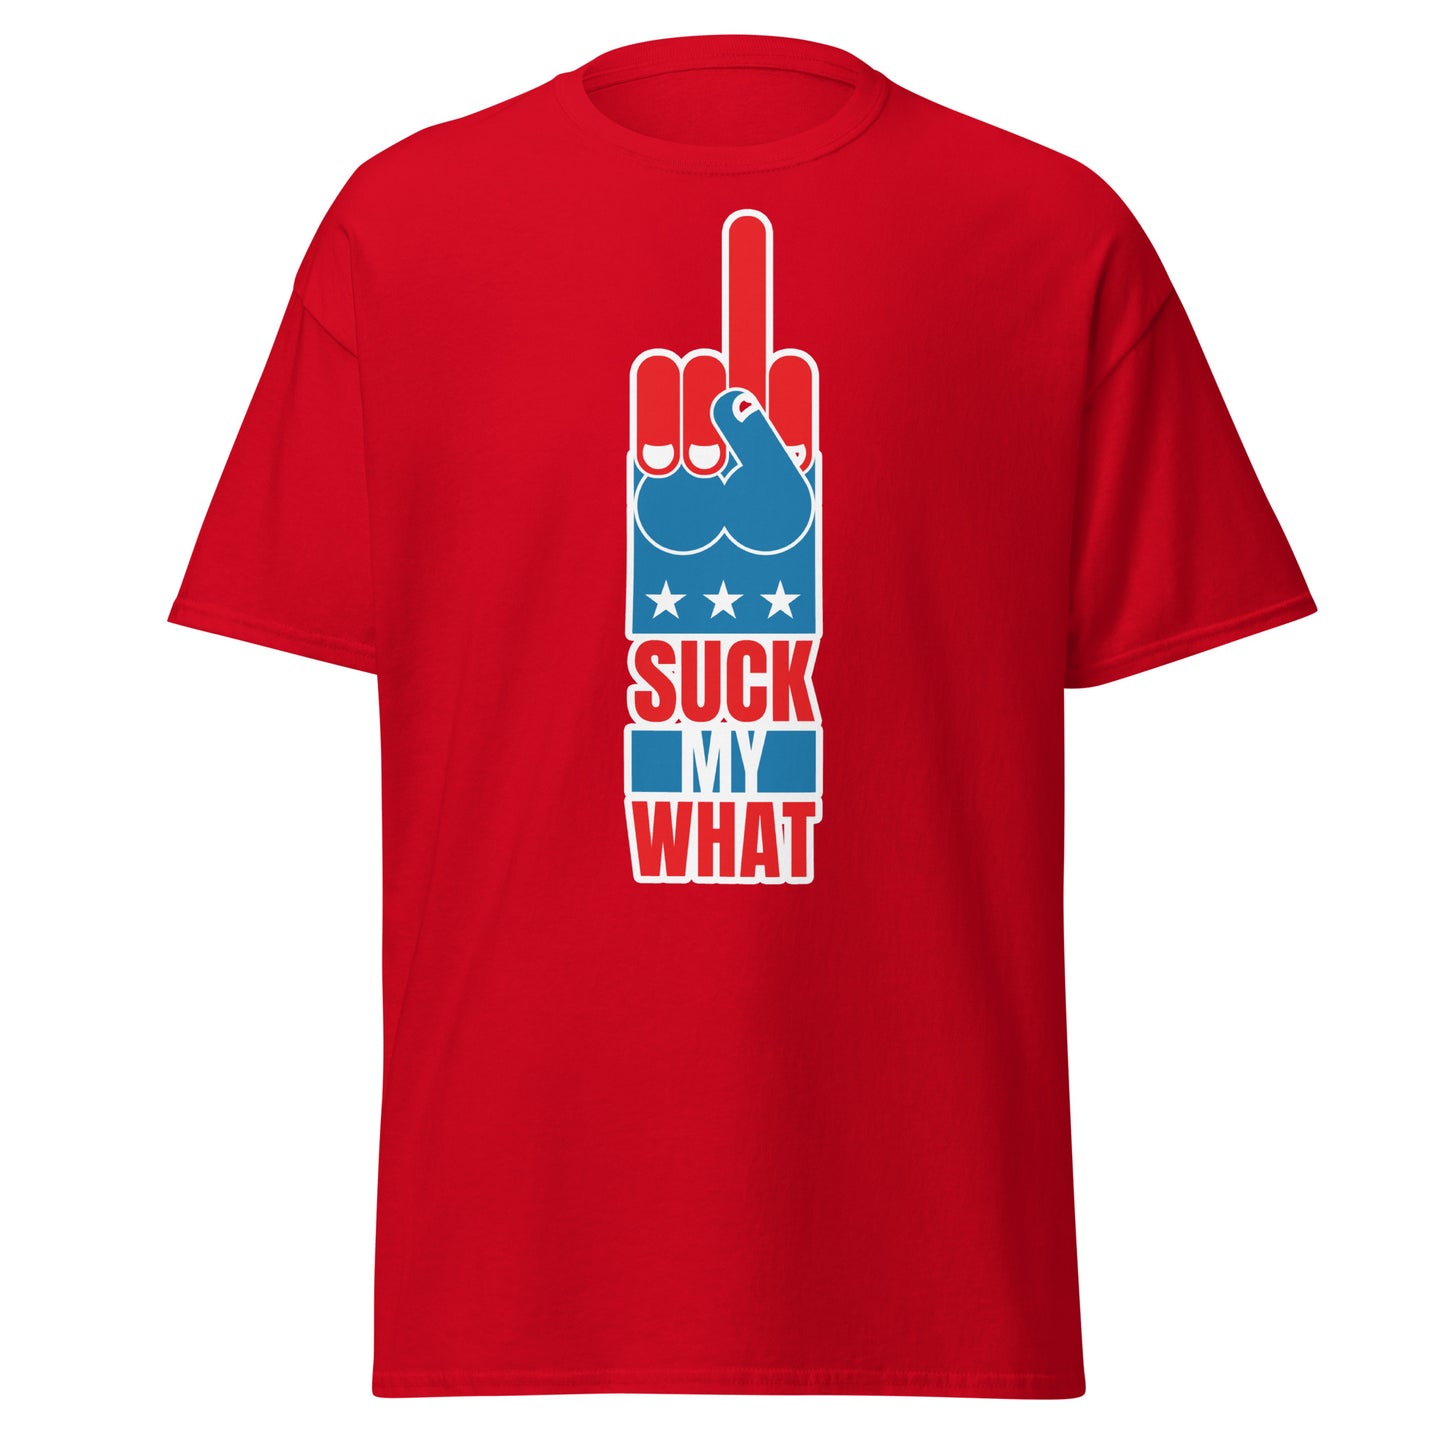 Patriot Missile Suck My What Red T-Shirt - Independence Day, 4th of July, USA Tee Shirt